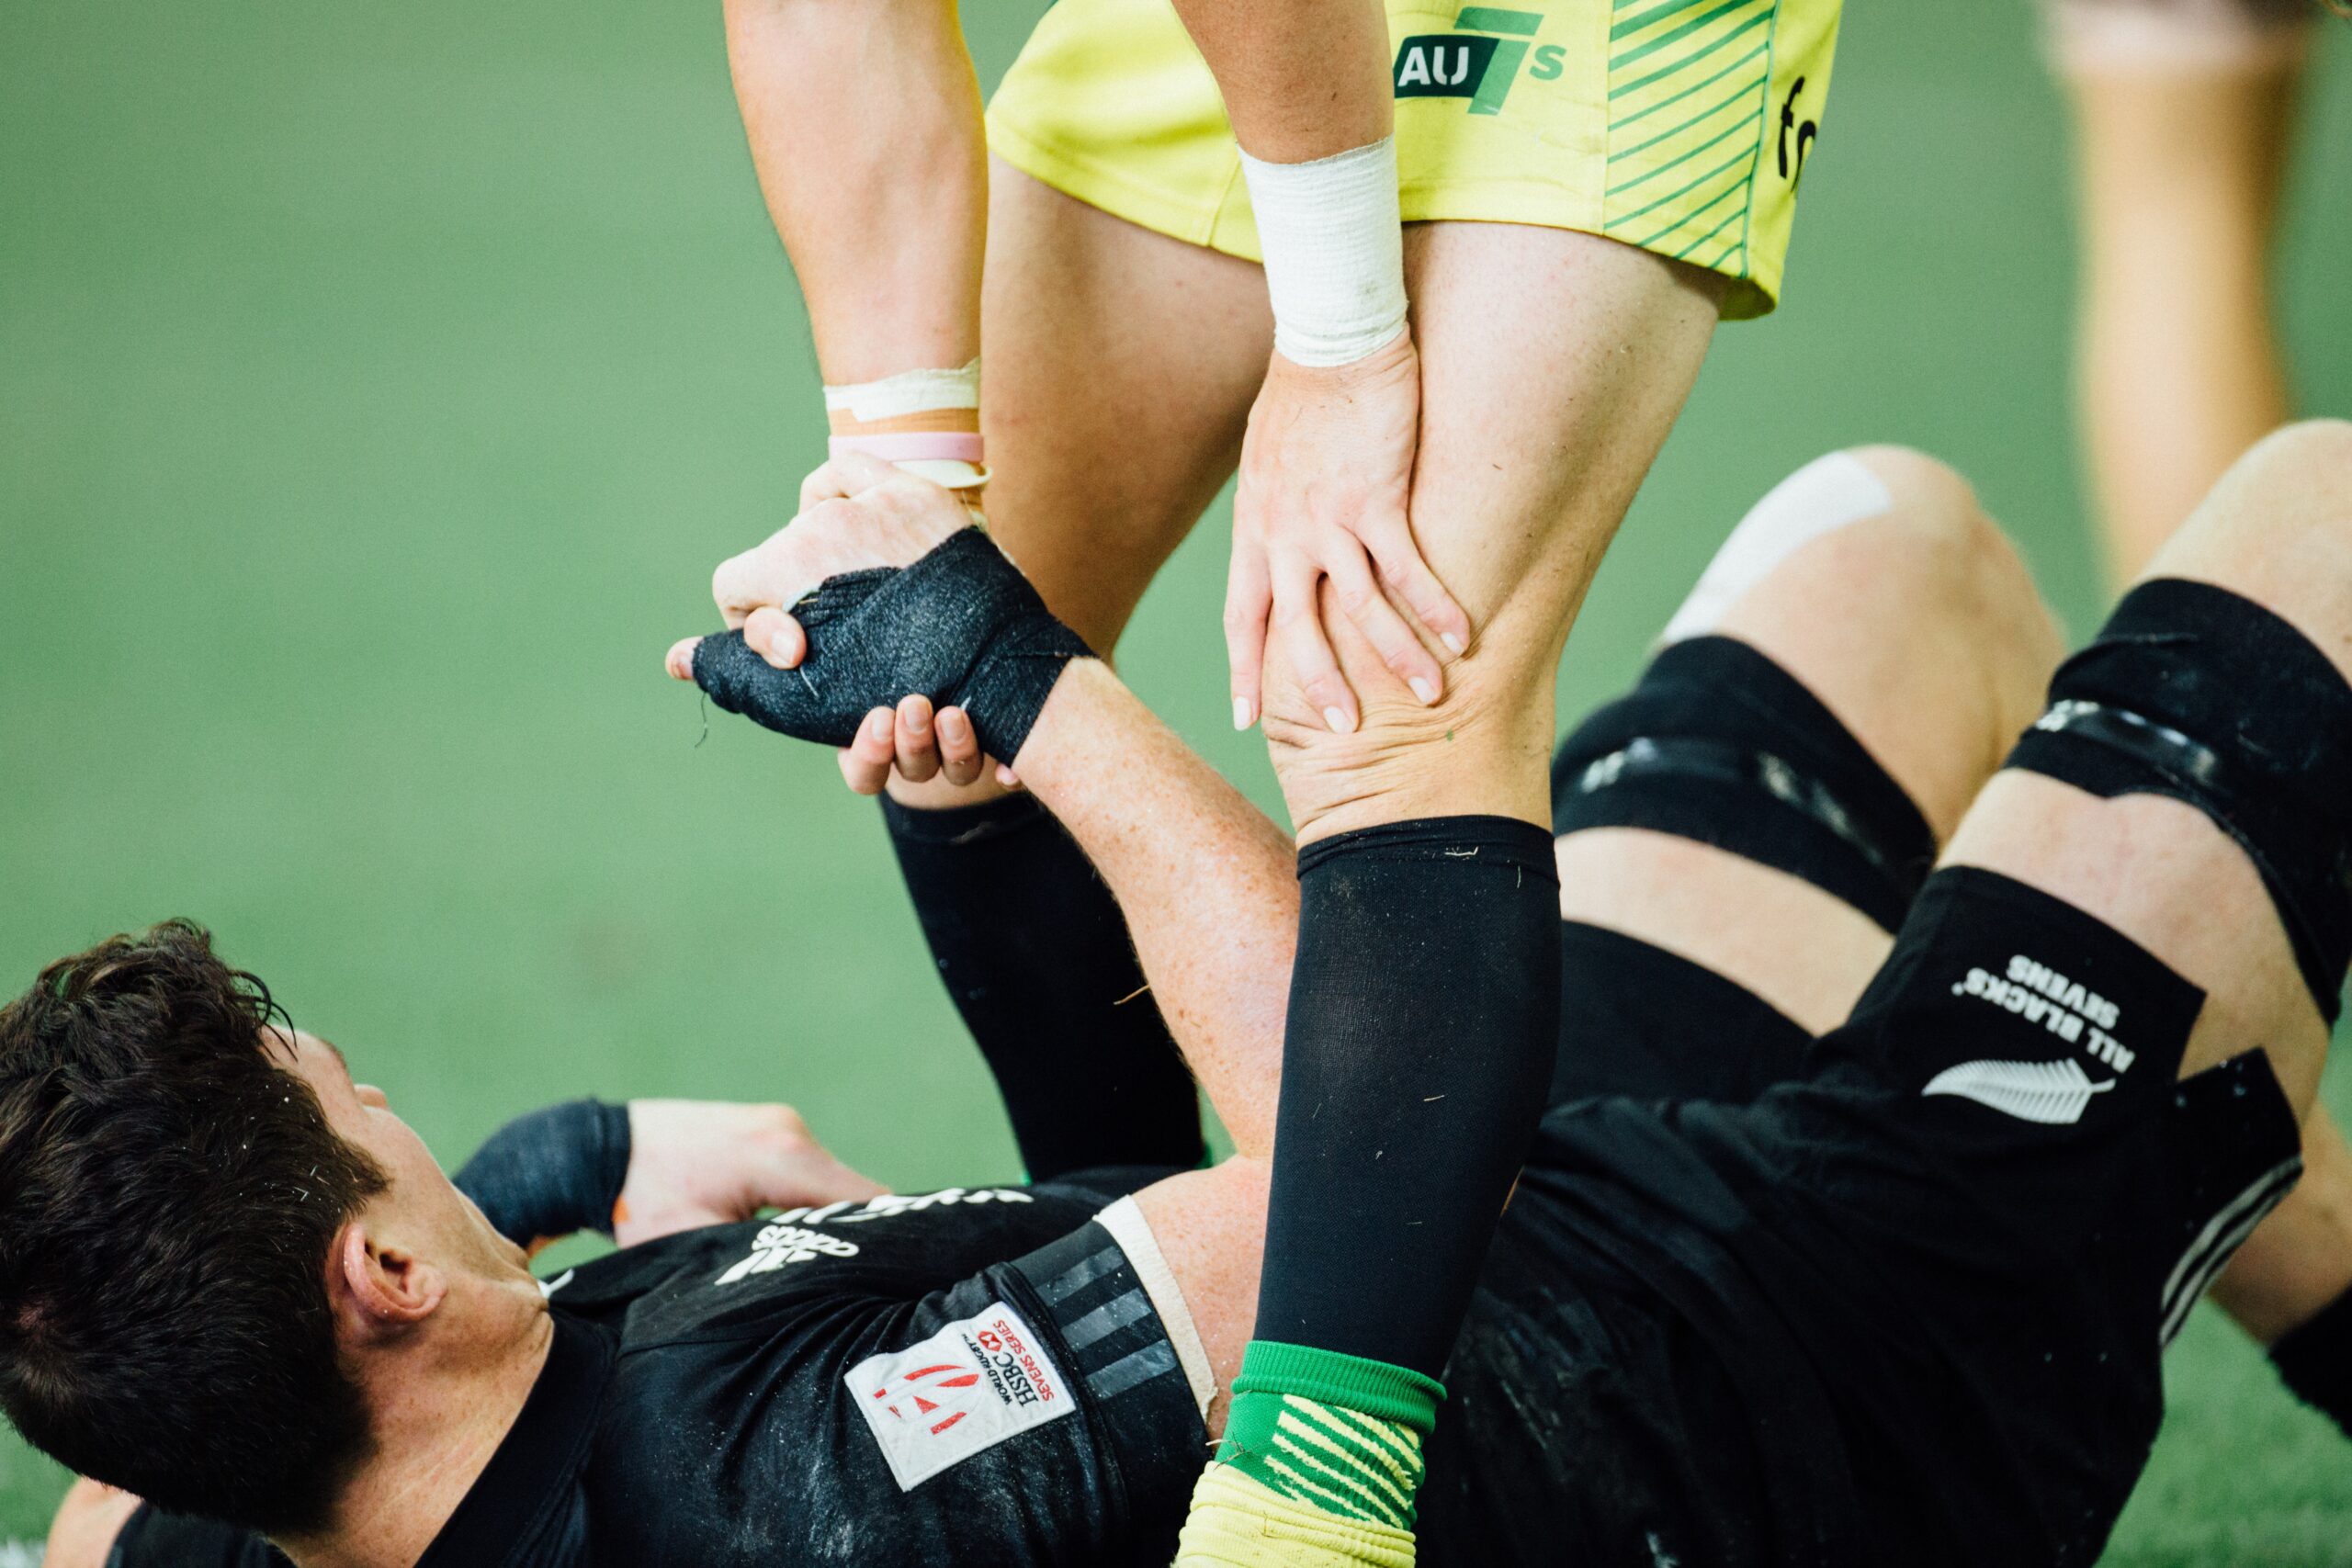 Picture of two soccer players, one is lying down and the other is helping him up with a hand on his knee to suggest there is ACL rehabilitation underway